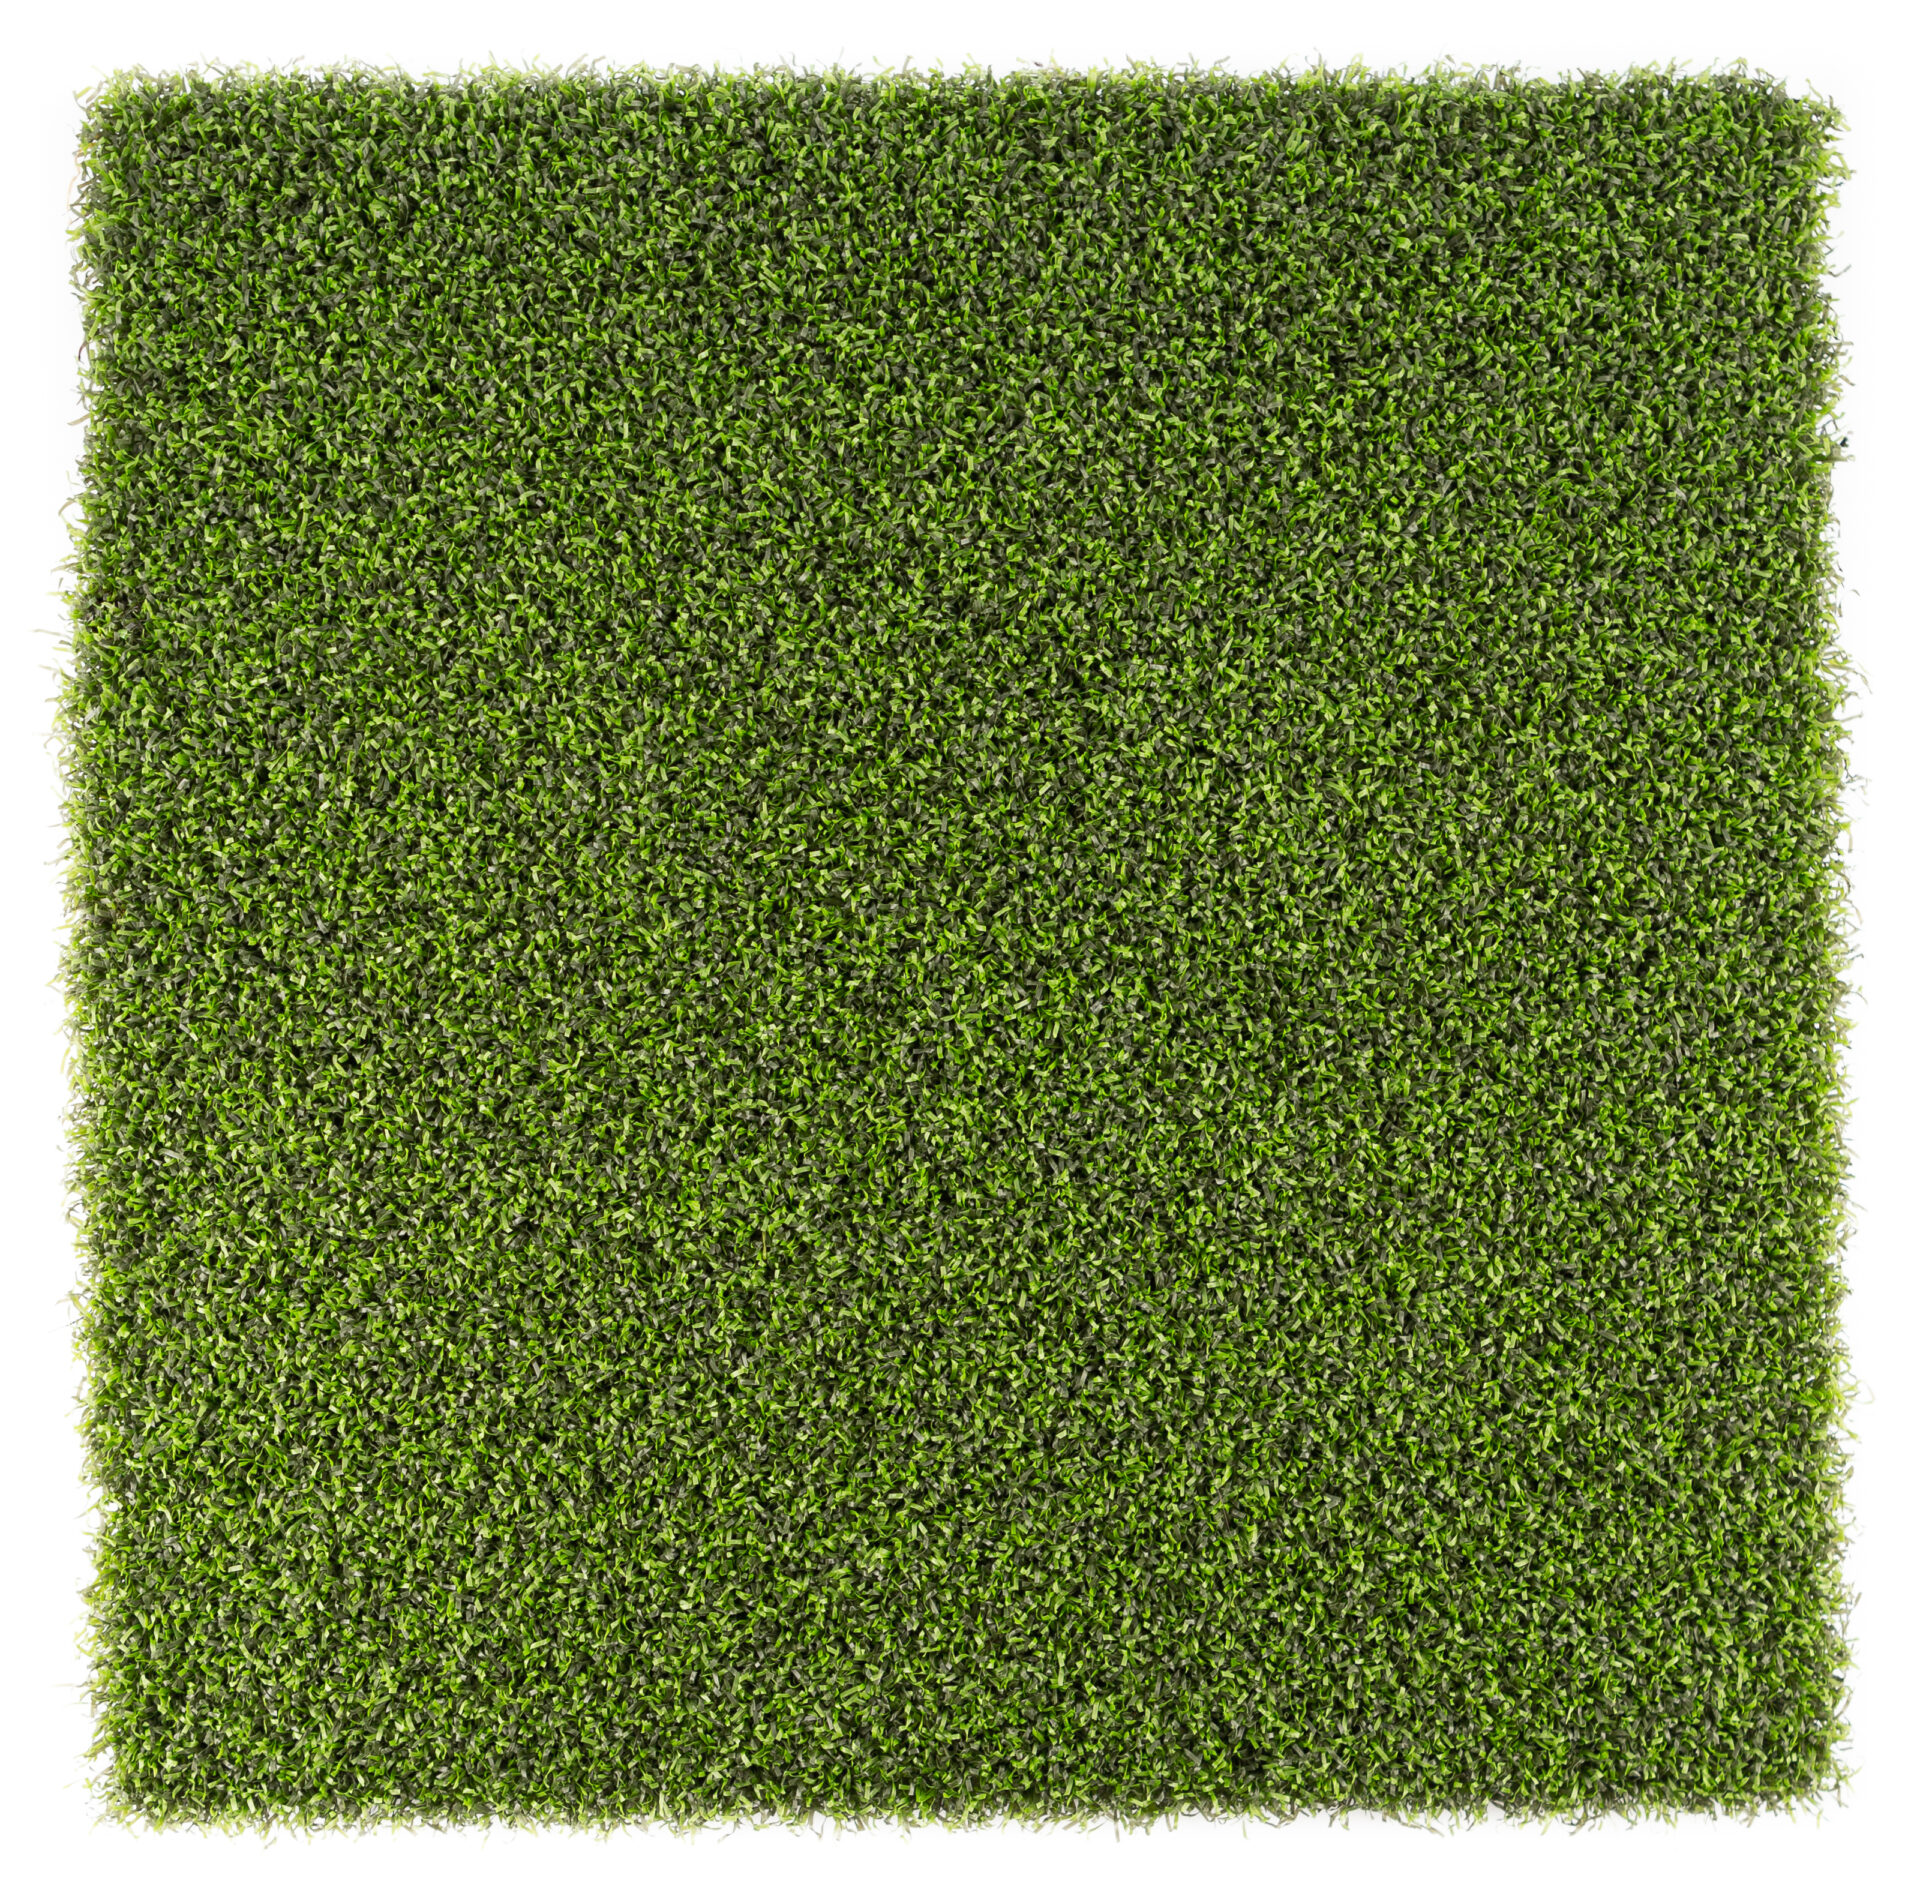 Premium Grass Blades Synthetic Artificial Turf Putting Green 30 Top